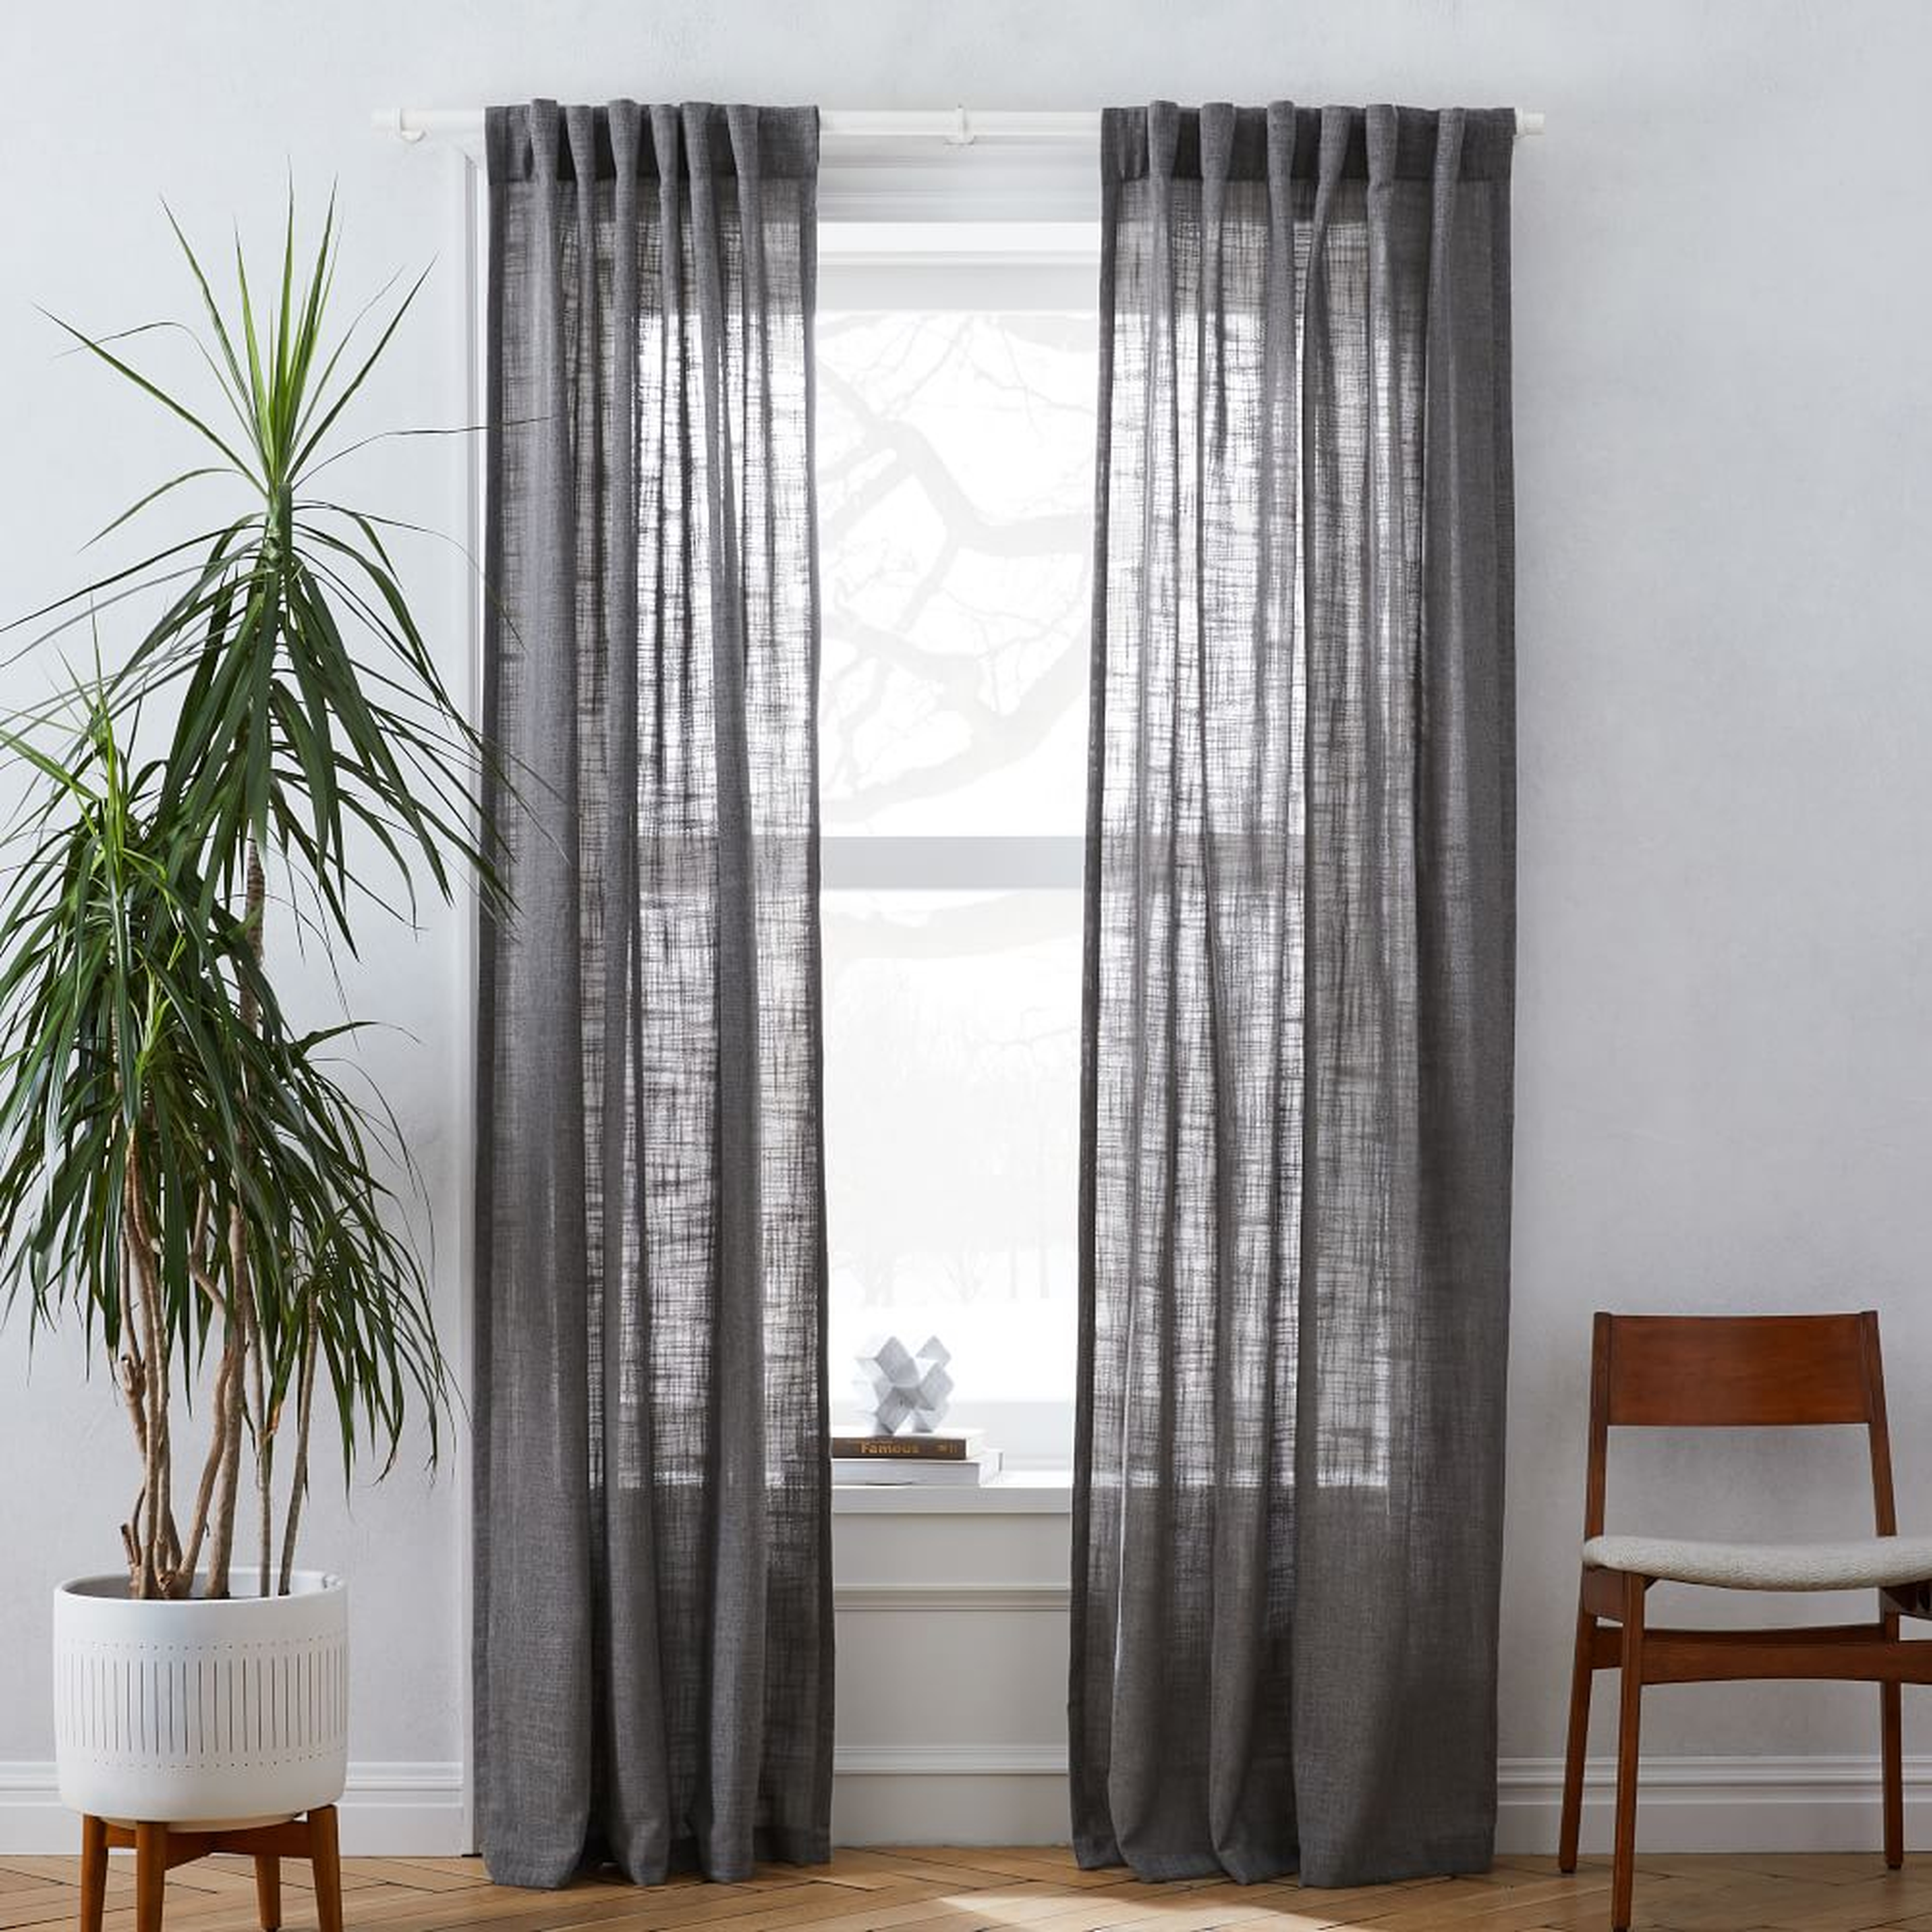 Crossweave Curtain with Blackout Lining, Charcoal, 48"X108" - West Elm